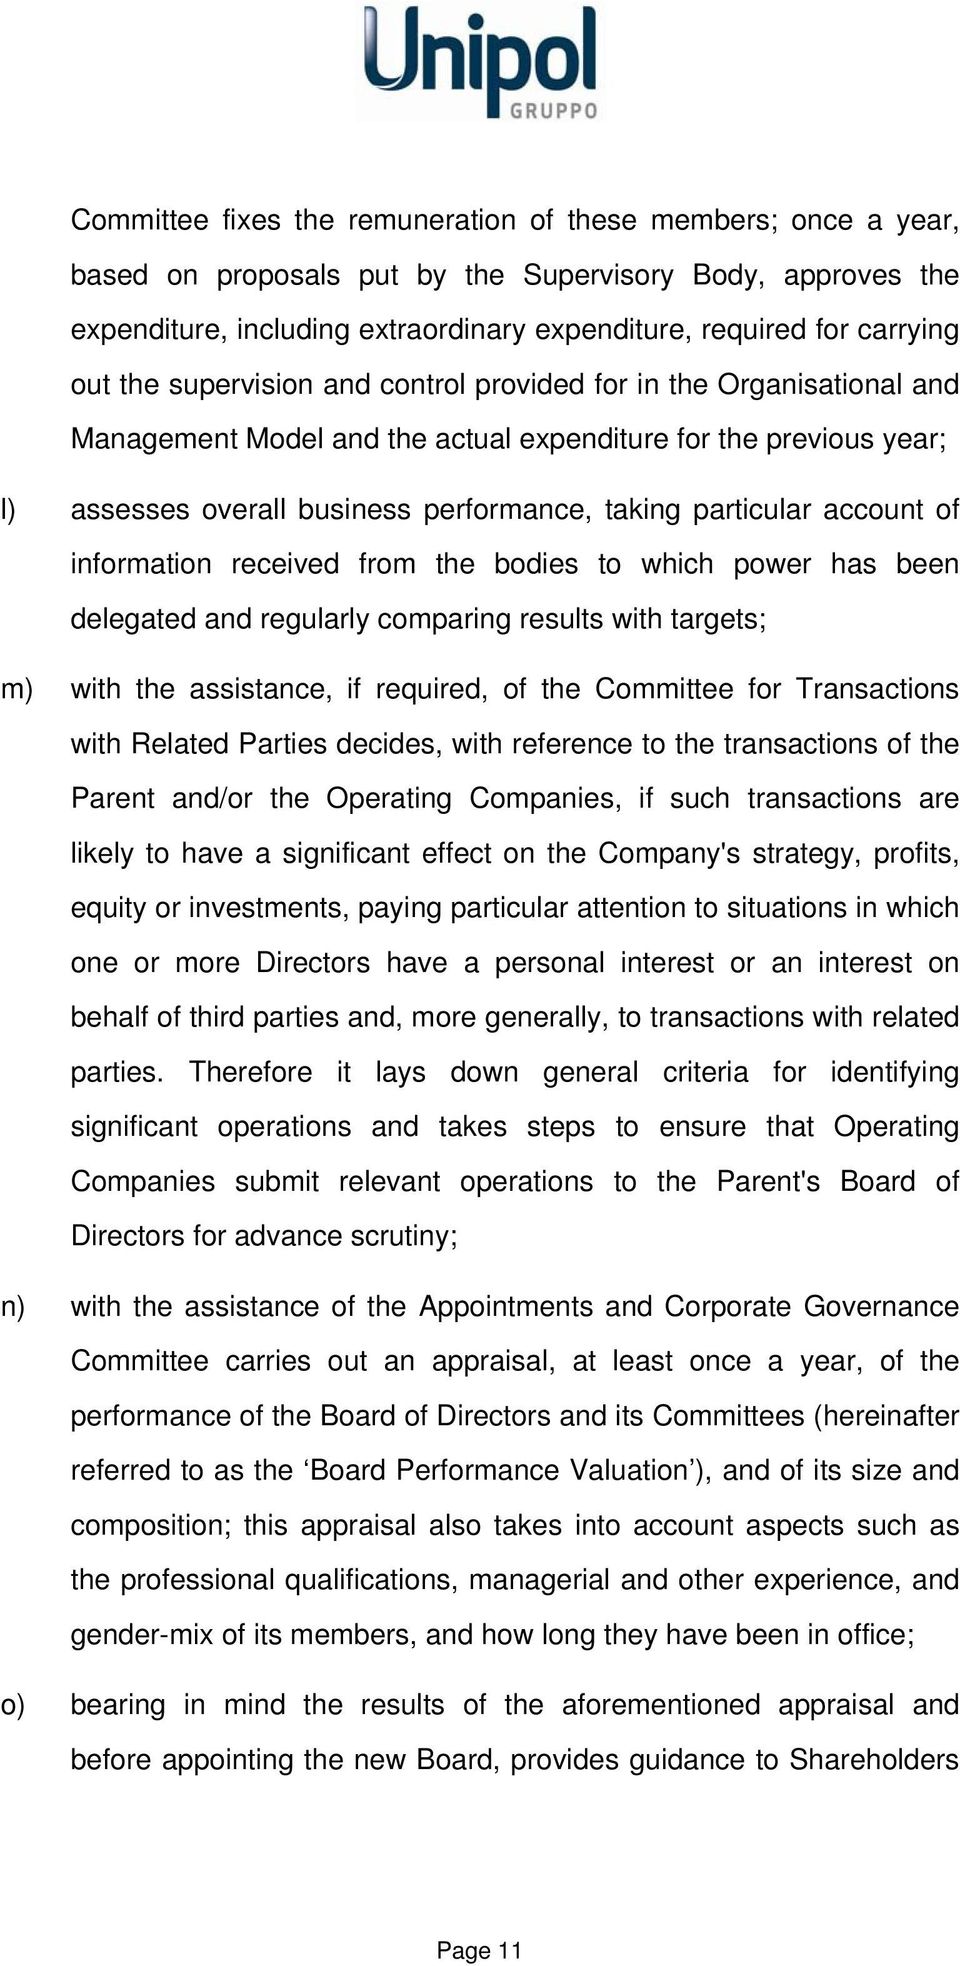 account of information received from the bodies to which power has been delegated and regularly comparing results with targets; m) with the assistance, if required, of the Committee for Transactions